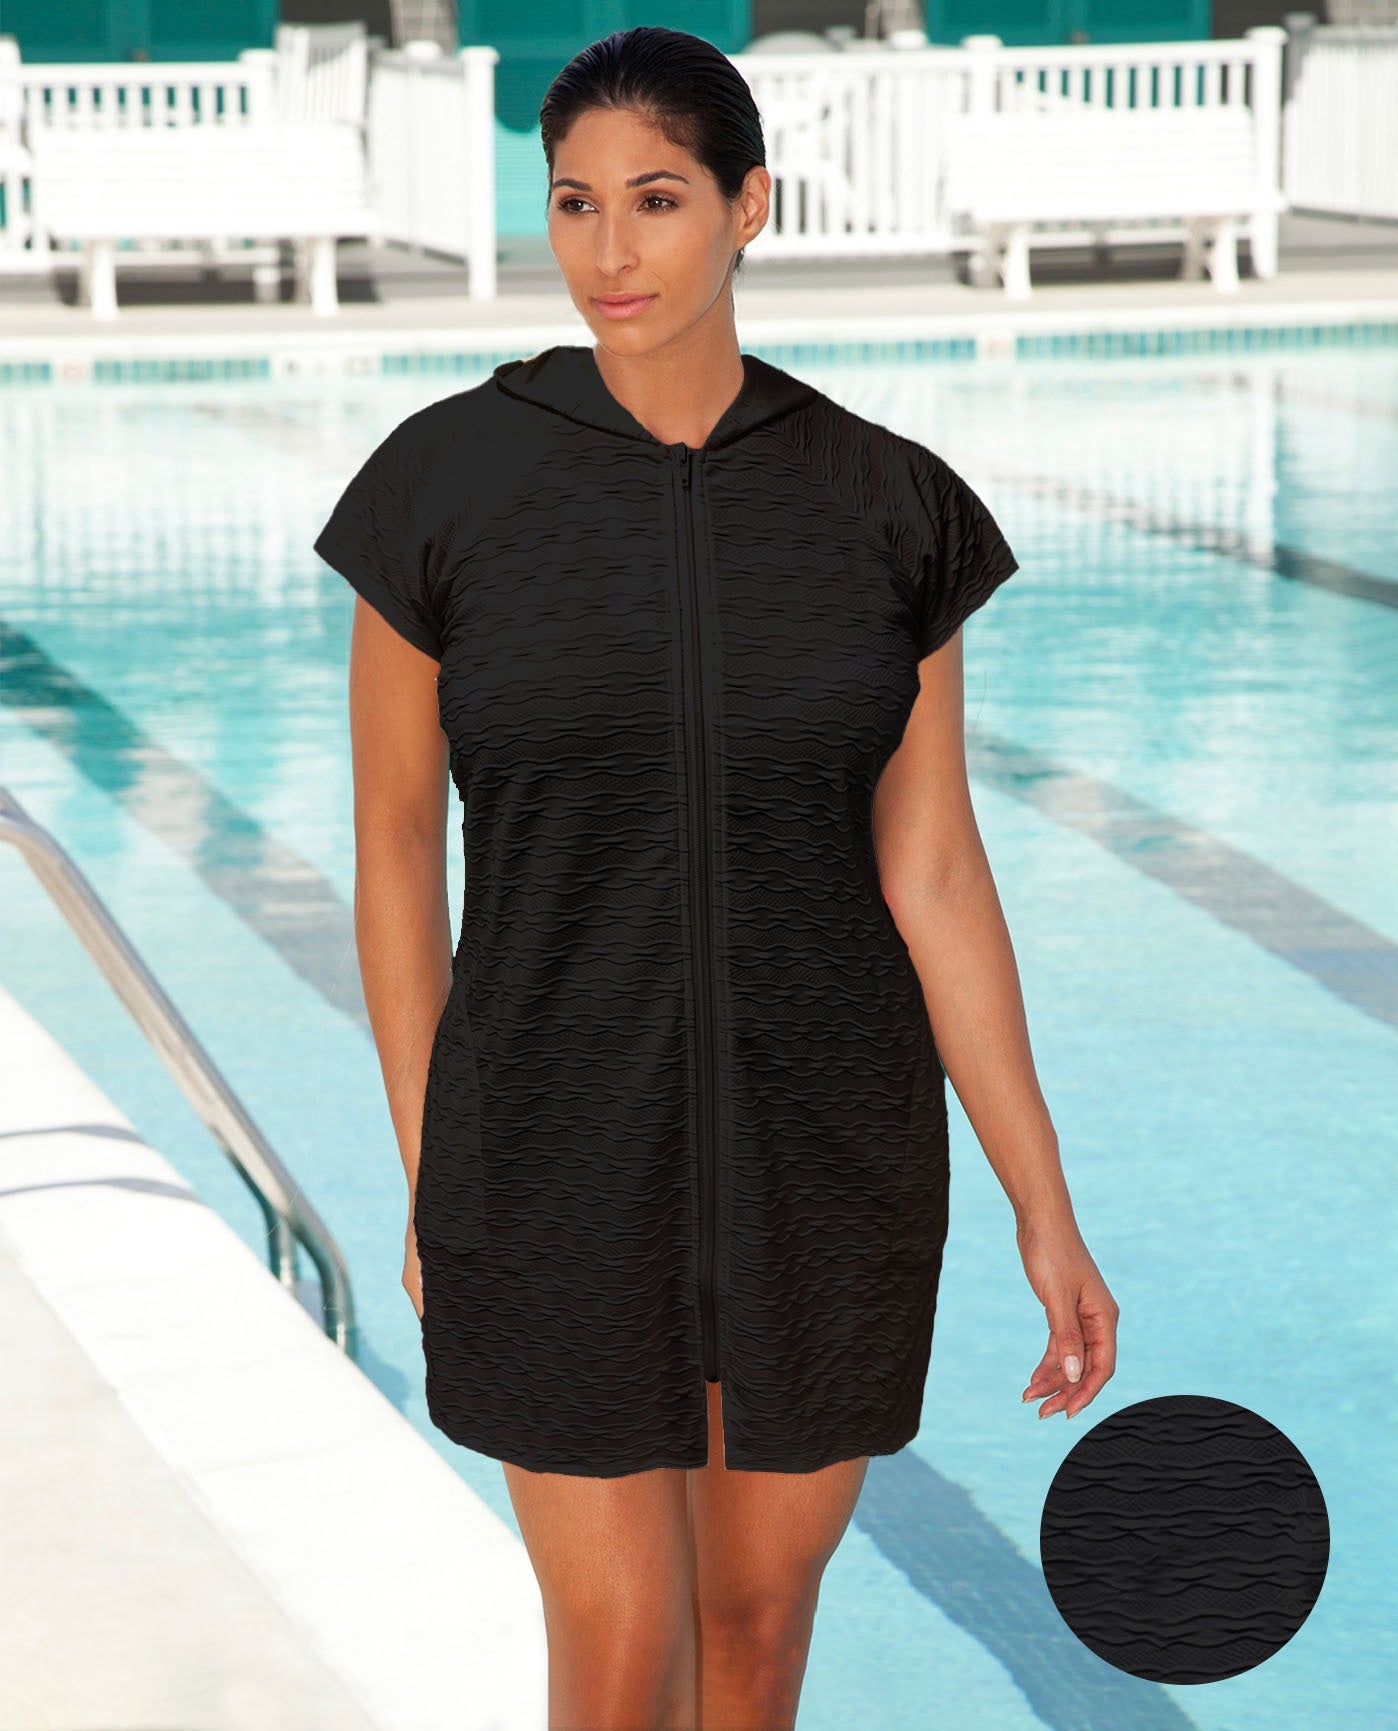 FRONT VIEW OF AQUAMORE SOLID TEXTURED ZIPPER HOODIE COVER UP TUNIC | 017 AQM TEXTURED BLACK